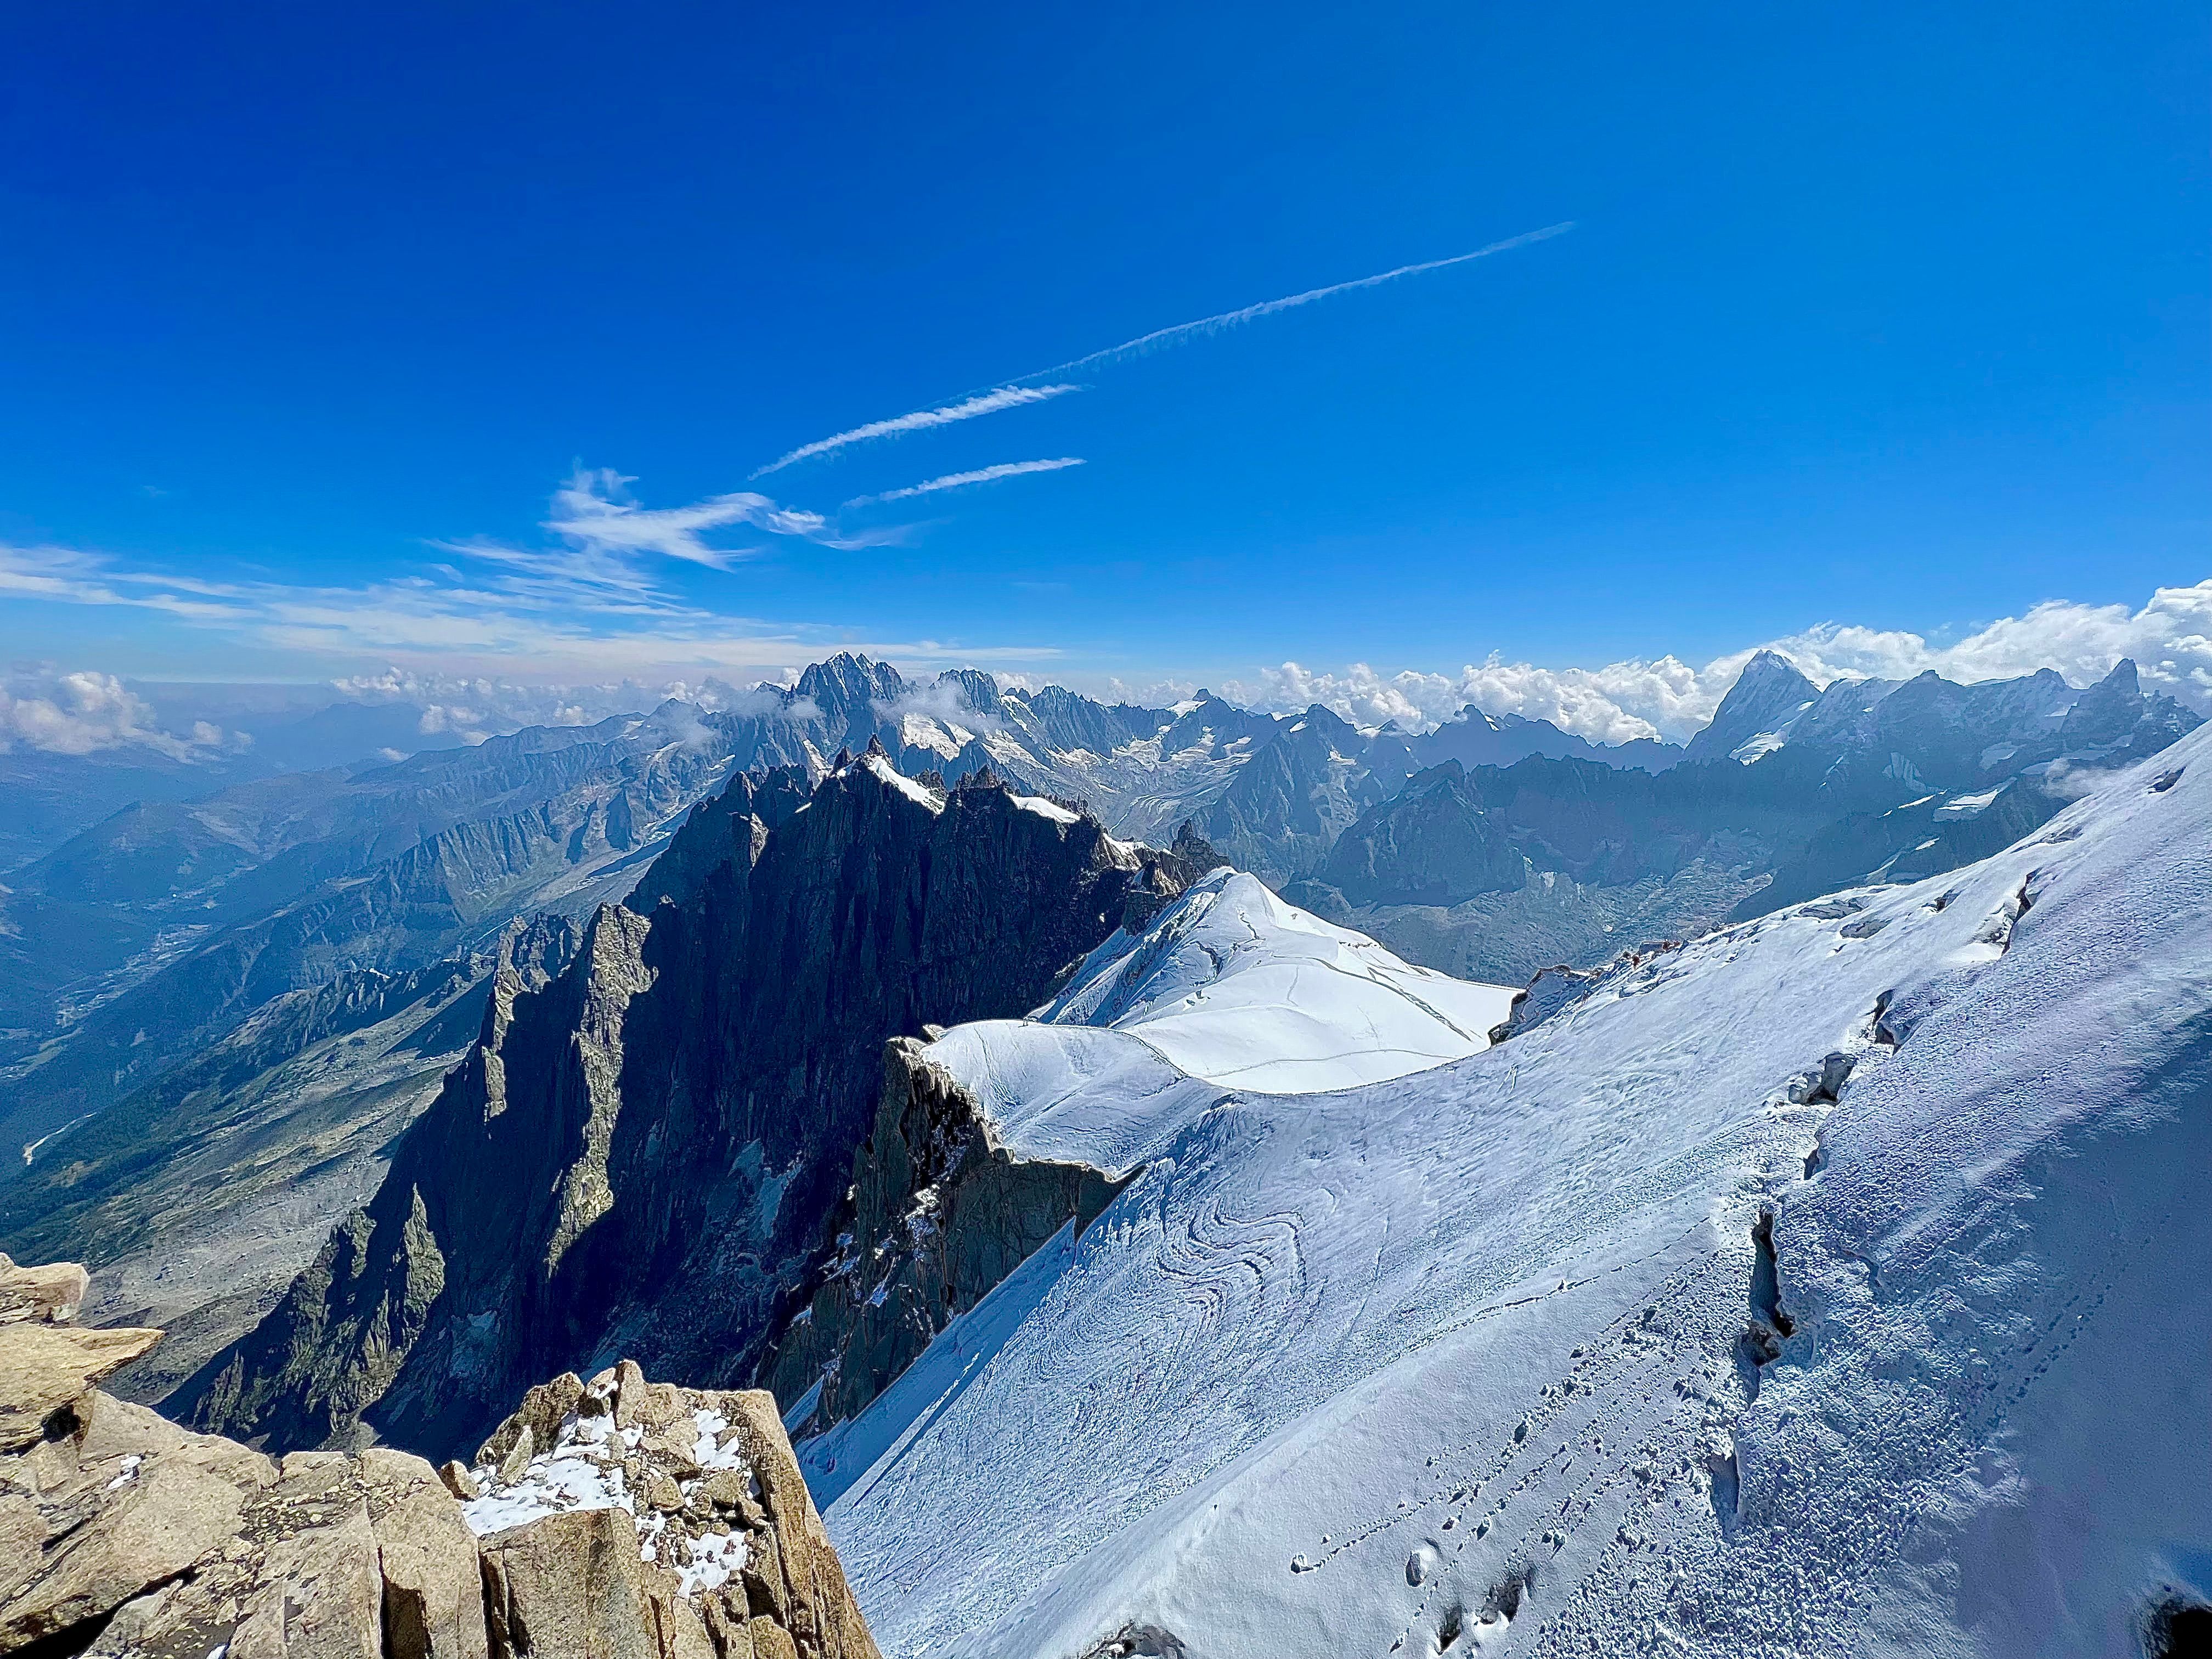 A photo on the top of a mountain with other mountains visible in the background with brighter edited colors